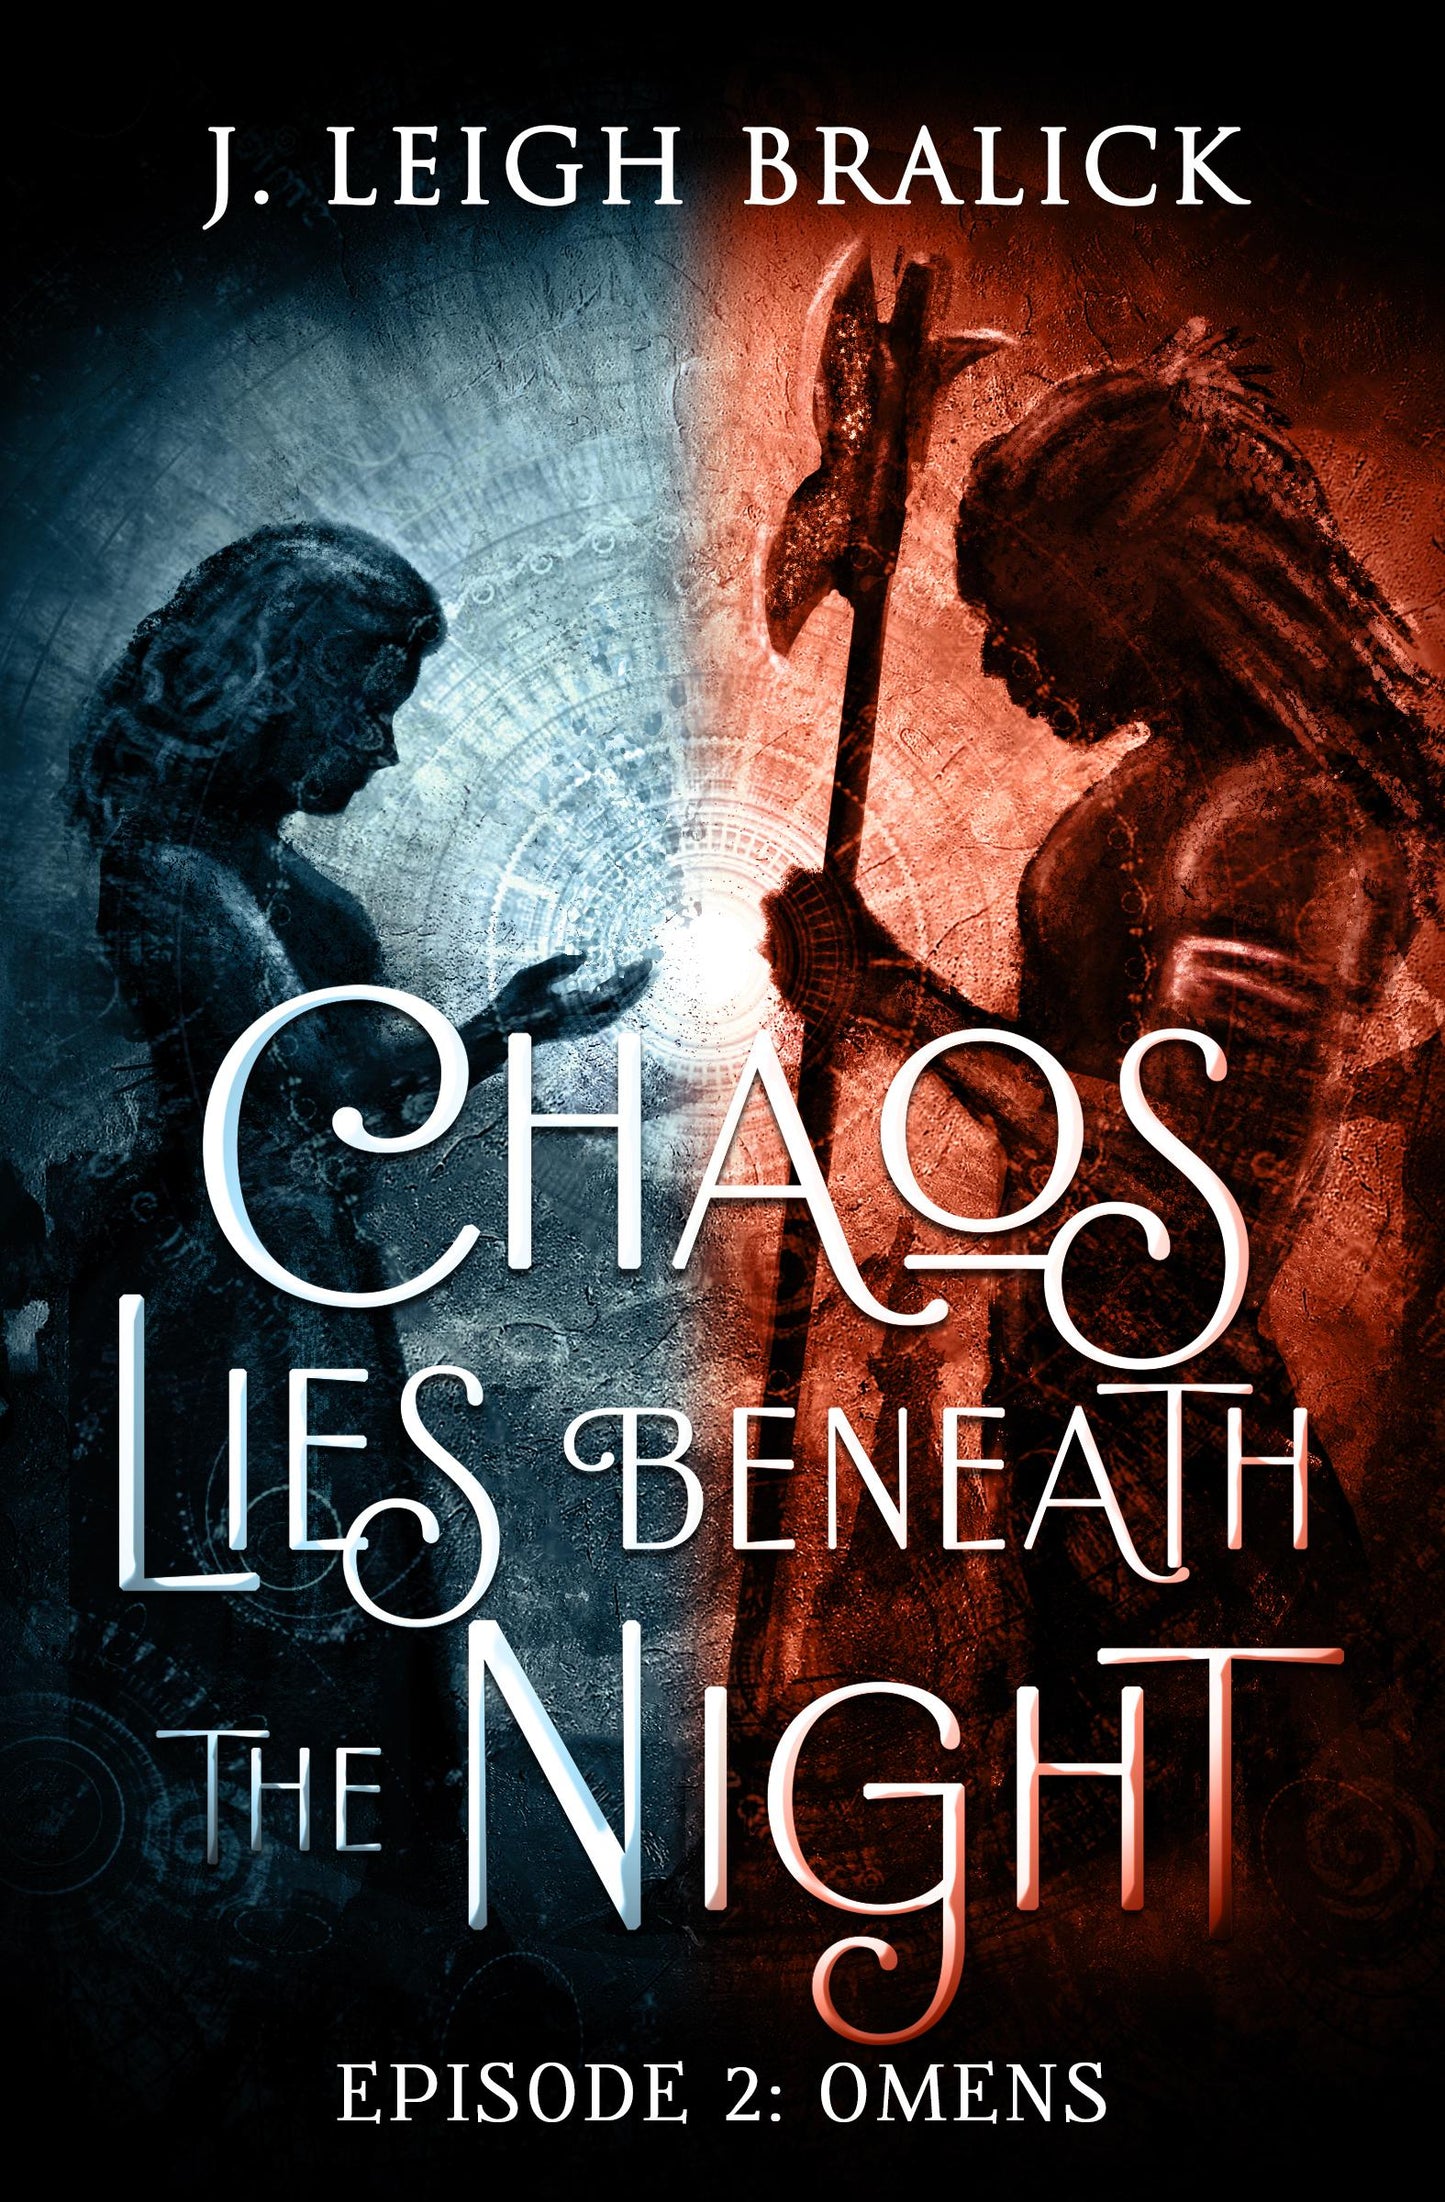 Chaos Lies Beneath the Night, Episode 2: Omens - SIGNED Paperback